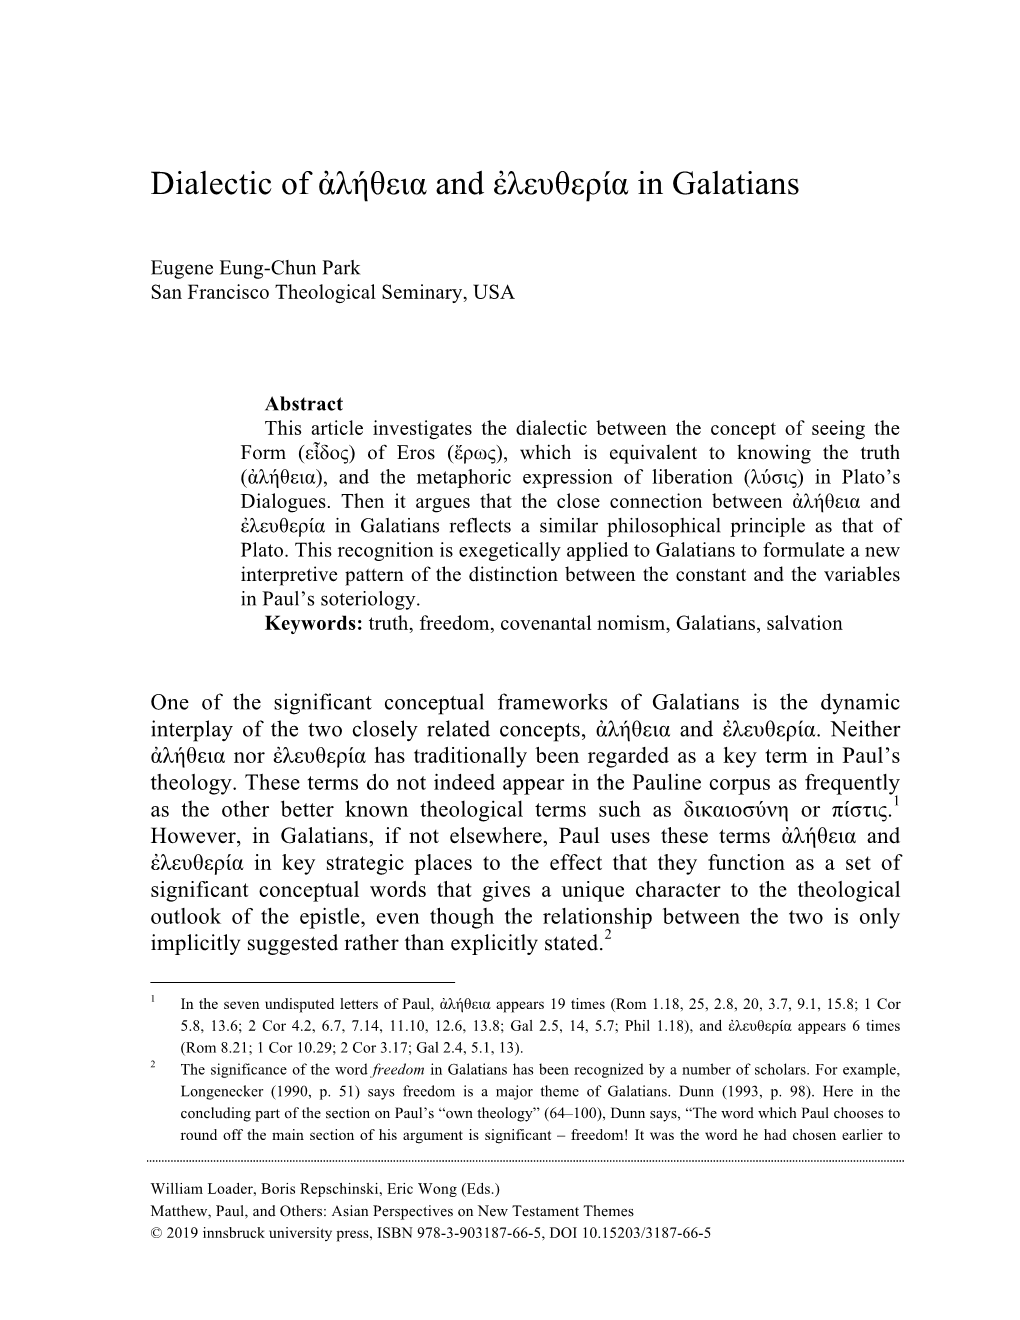 Dialectic of Ἀλήθεια and Ἐλευθερία in Galatians